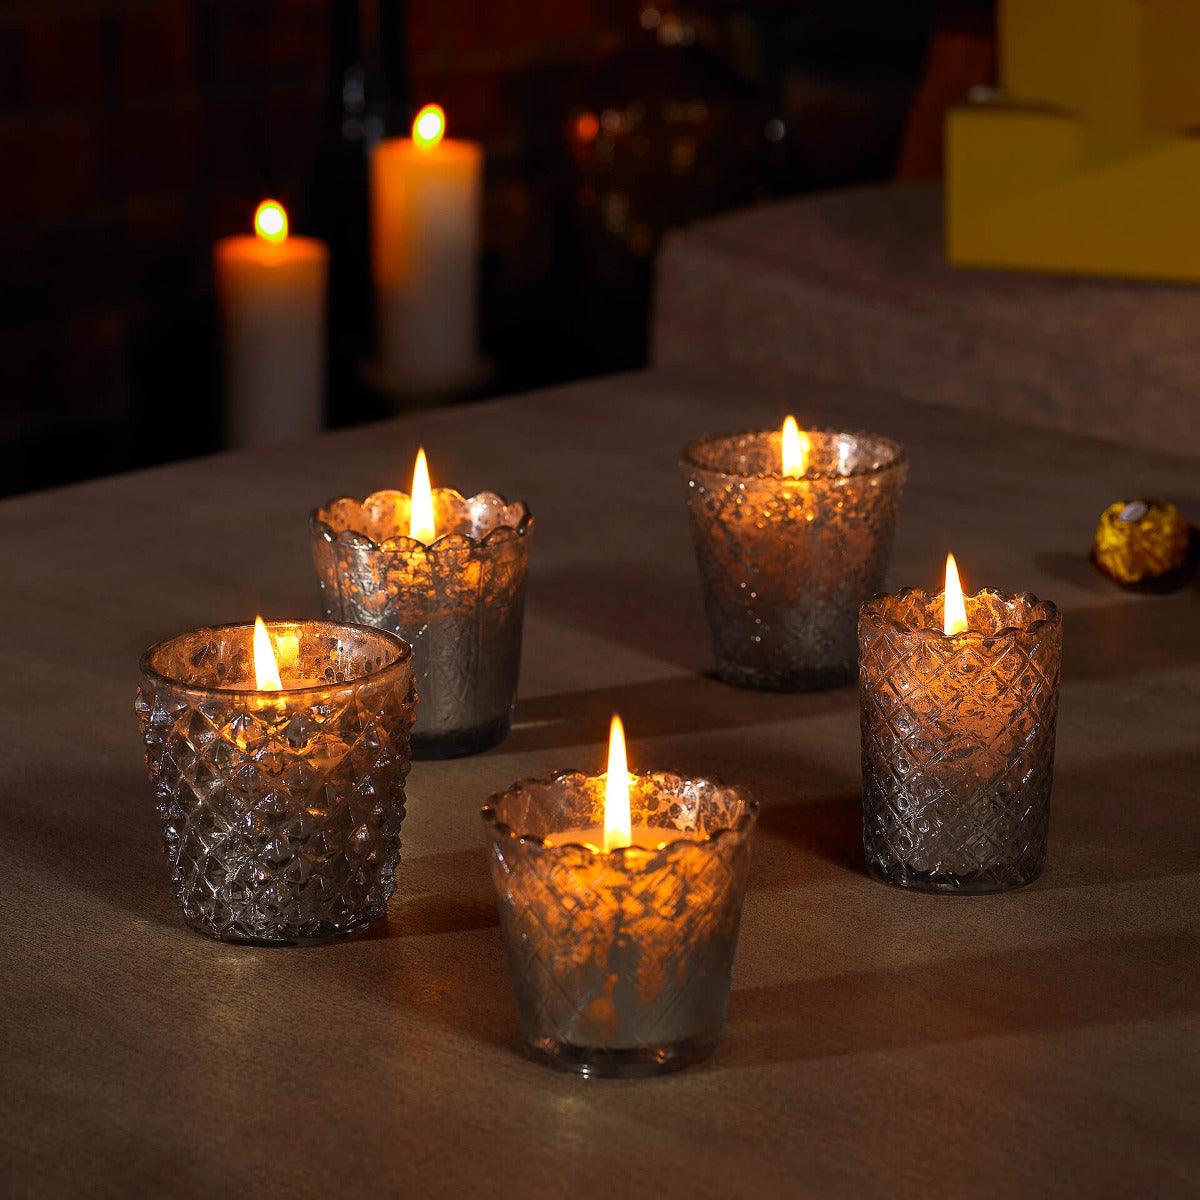 Hibiscus Glow Assorted Wax Candles Set Of Five